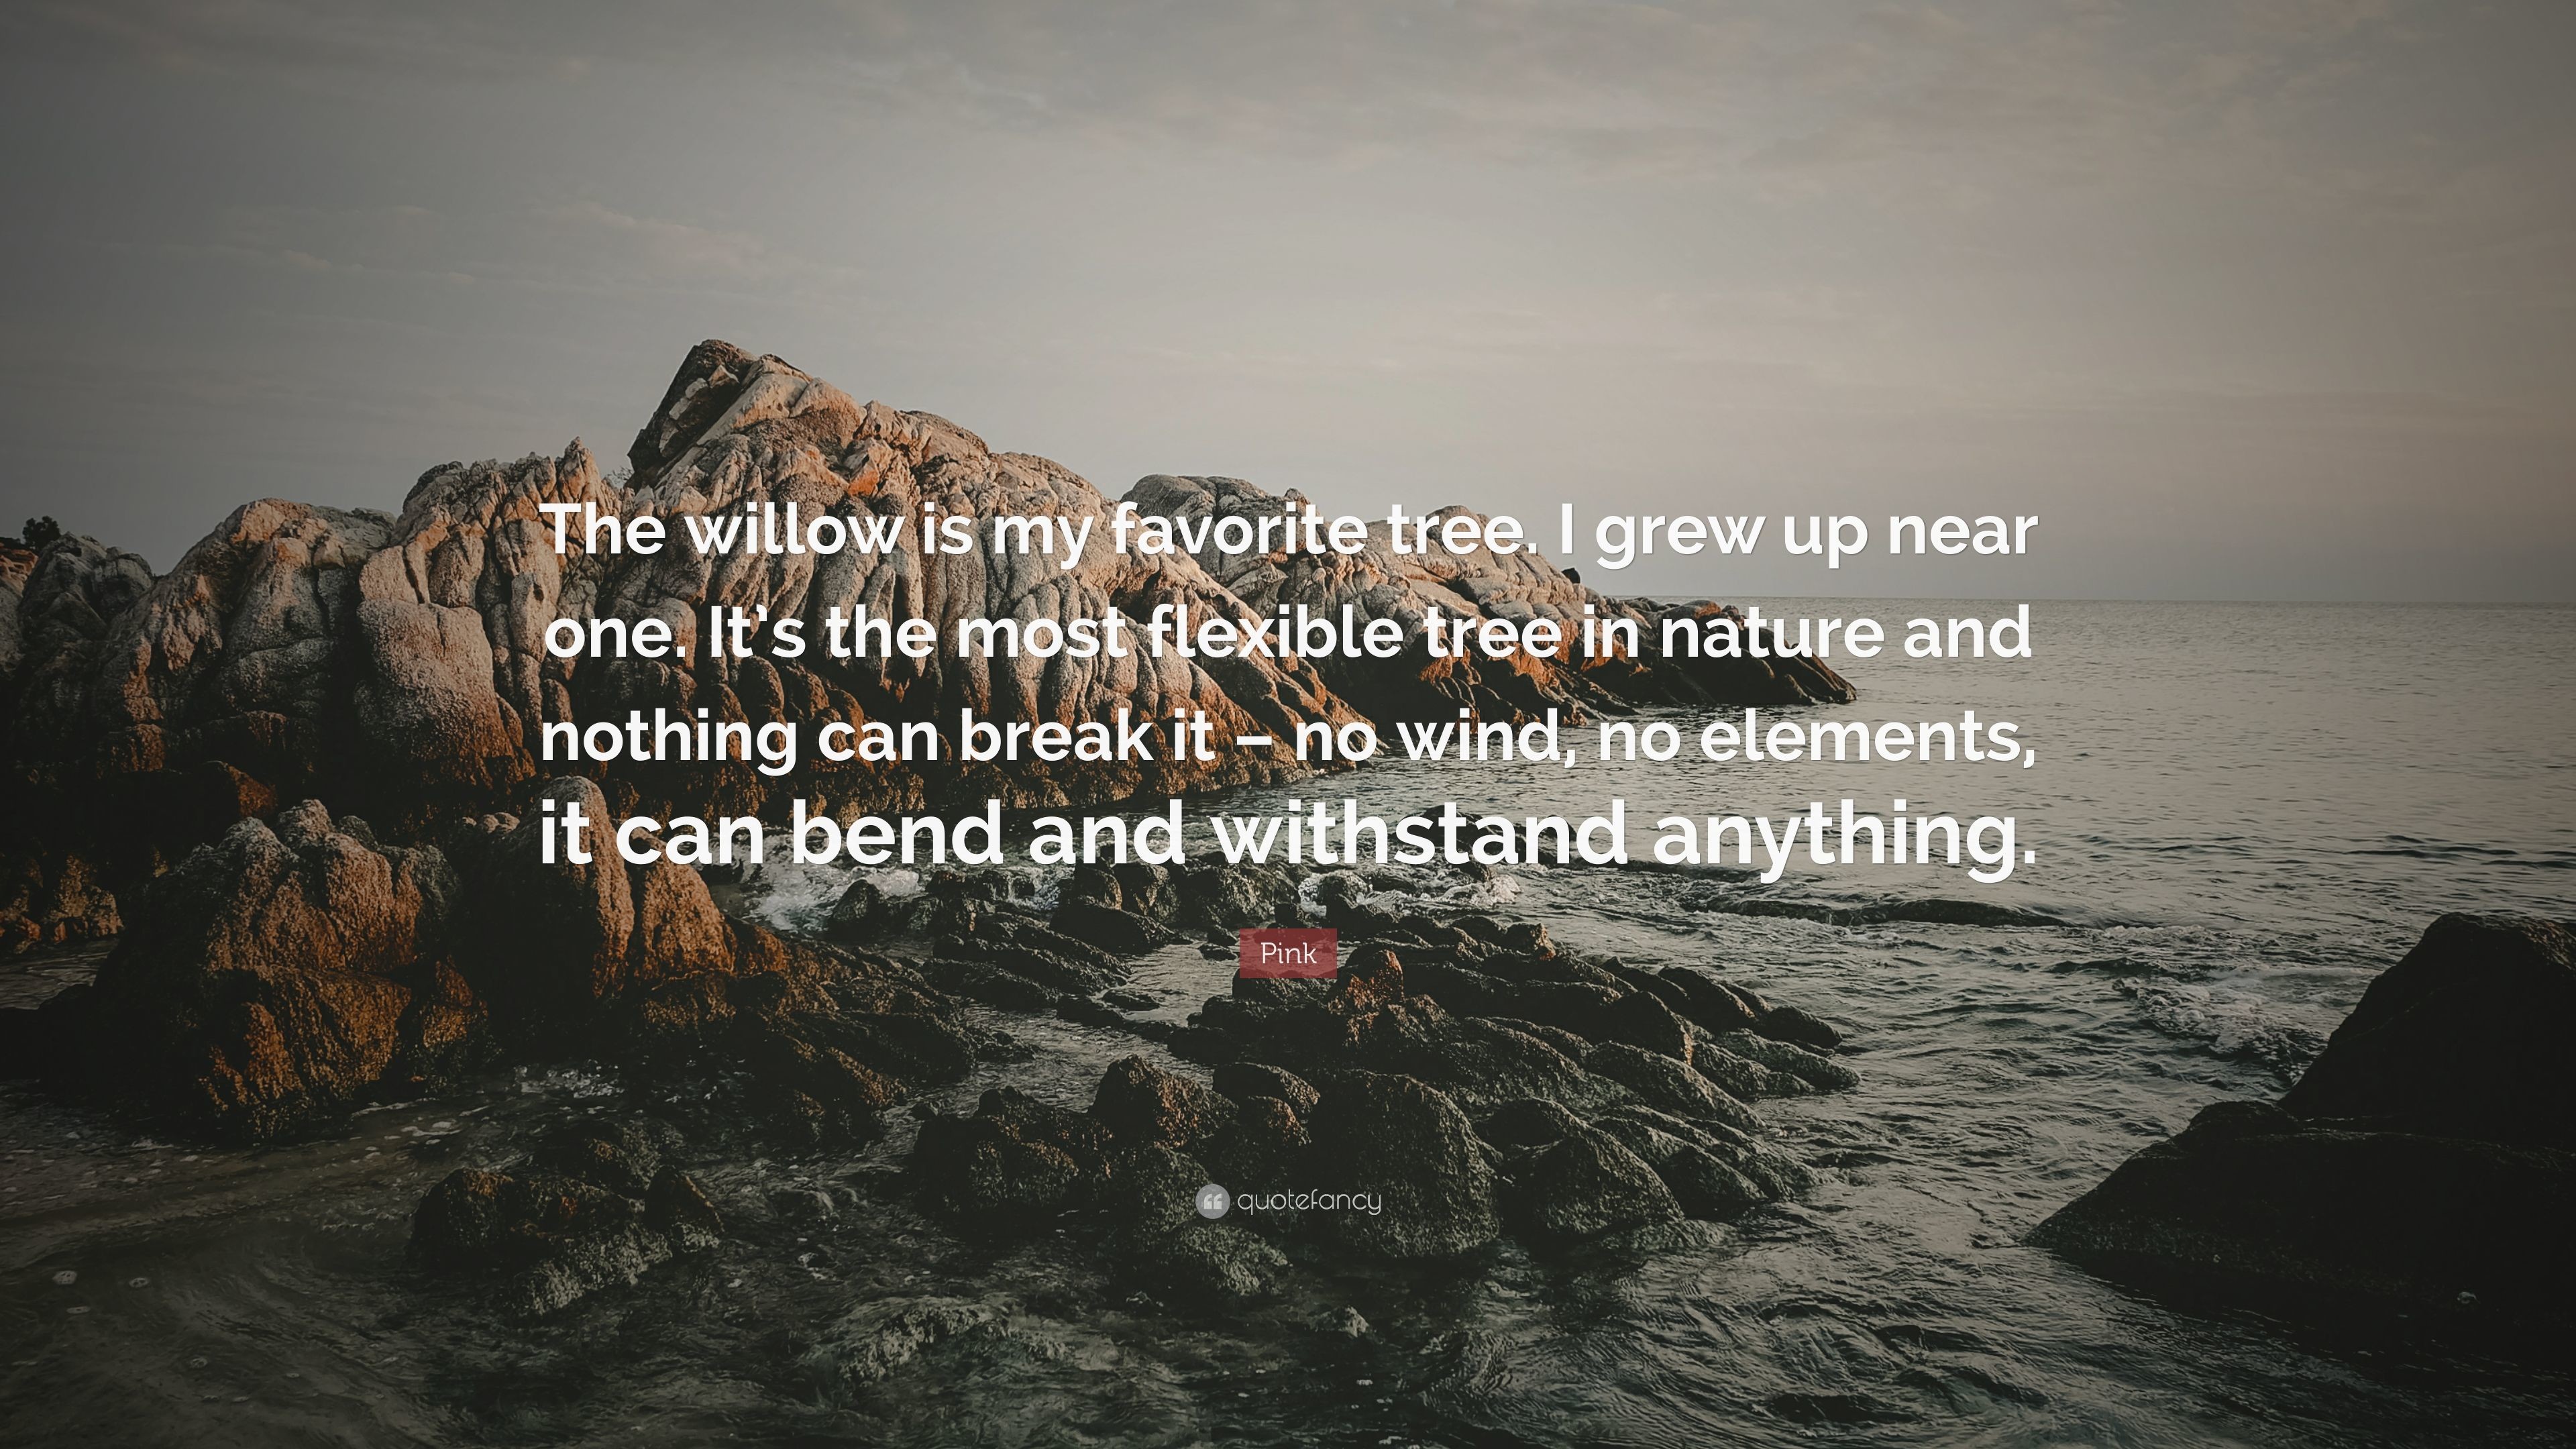 3840x2160 Pink Quote: “The willow is my favorite tree. I grew up near one